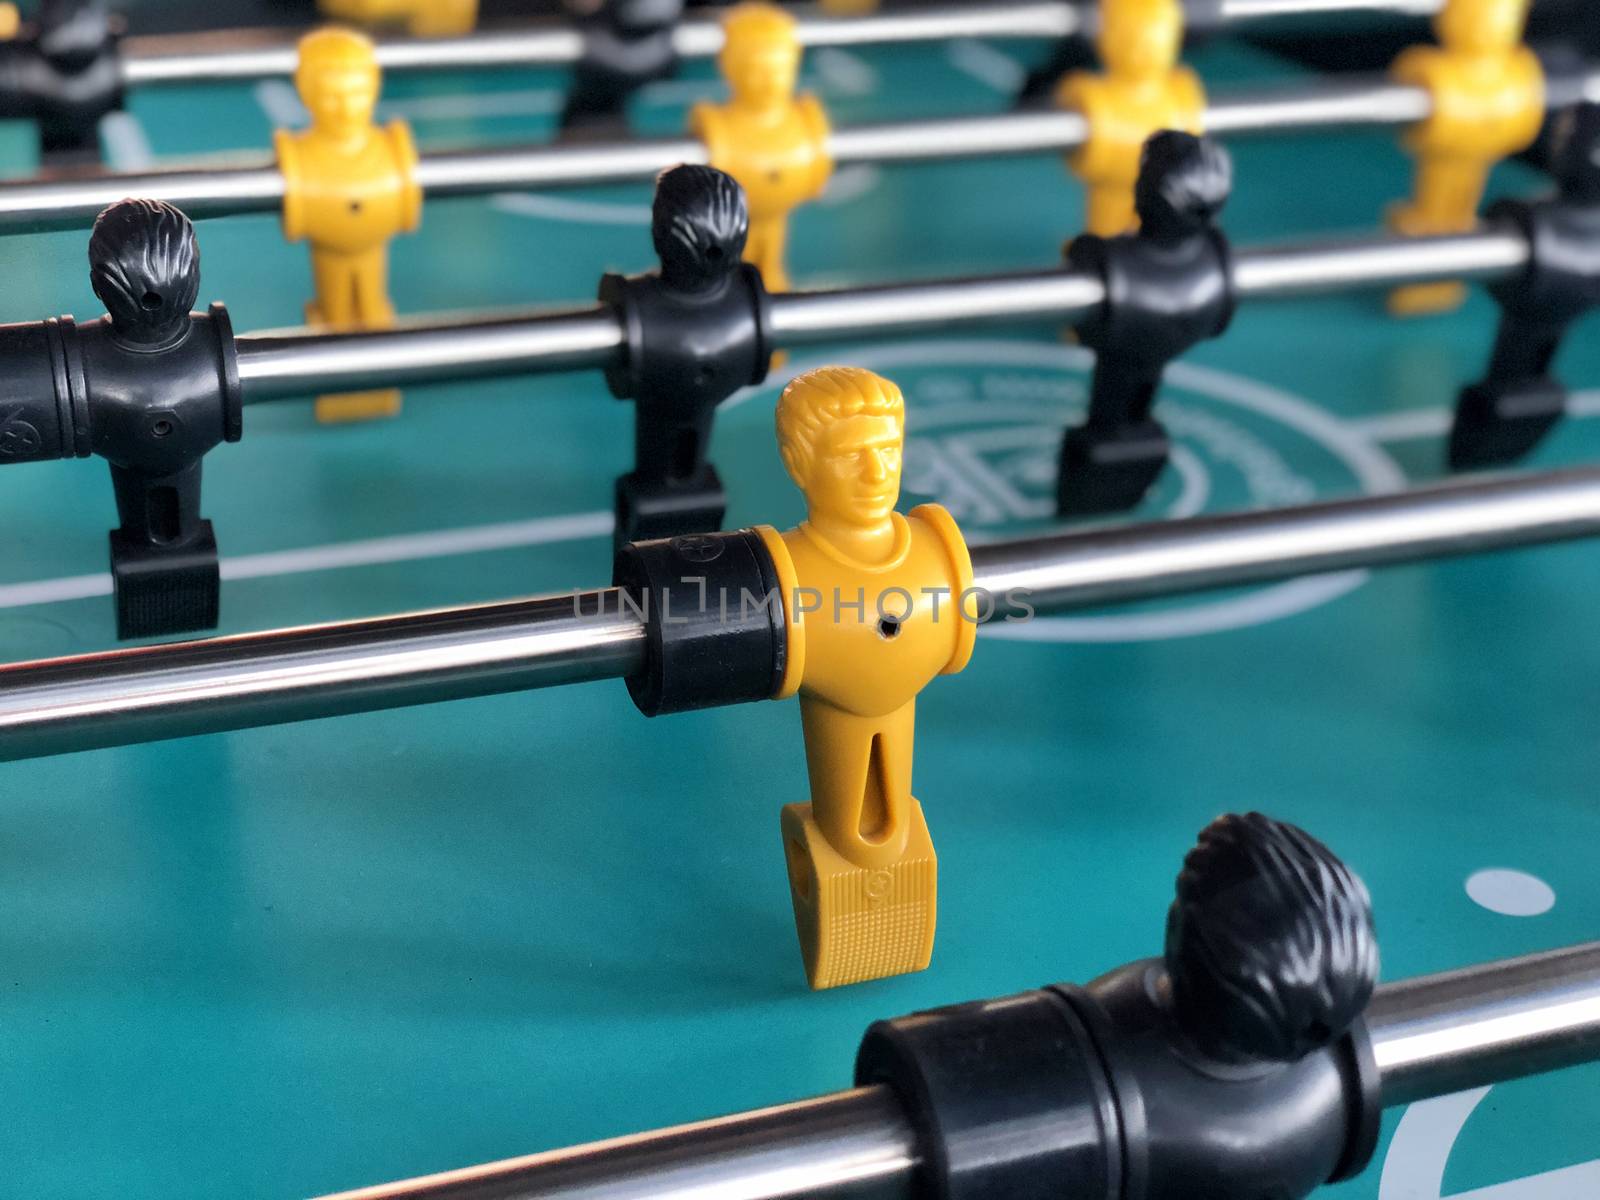 Table football game, Soccer table with yellow and black players by Surasak